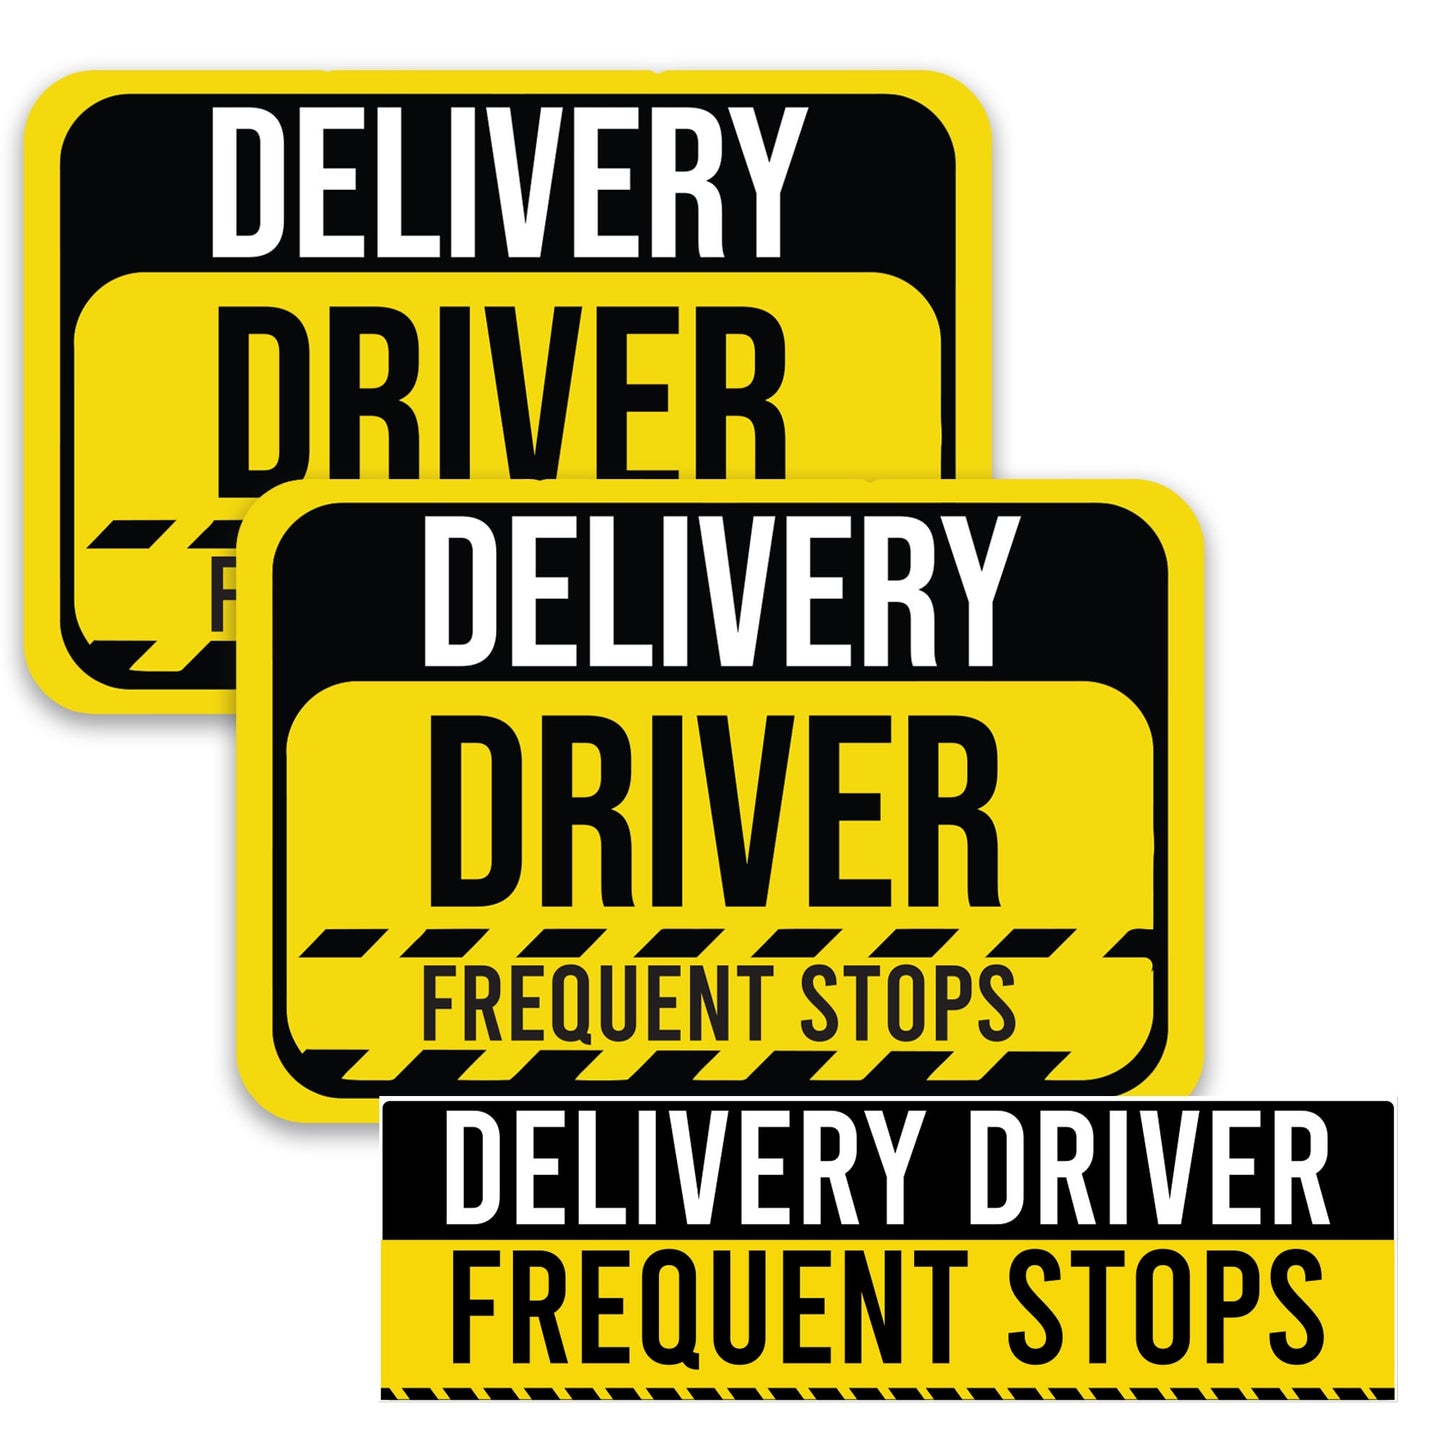 Magnet Me Up Caution Frequent Stops Delivery Driver Automotive Magnet Decal, 3 Pack, Two 8x12 inch and One 3x10 Inch, Automotive Magnet for Car, Flex Delivery Driver, Crafted in USA